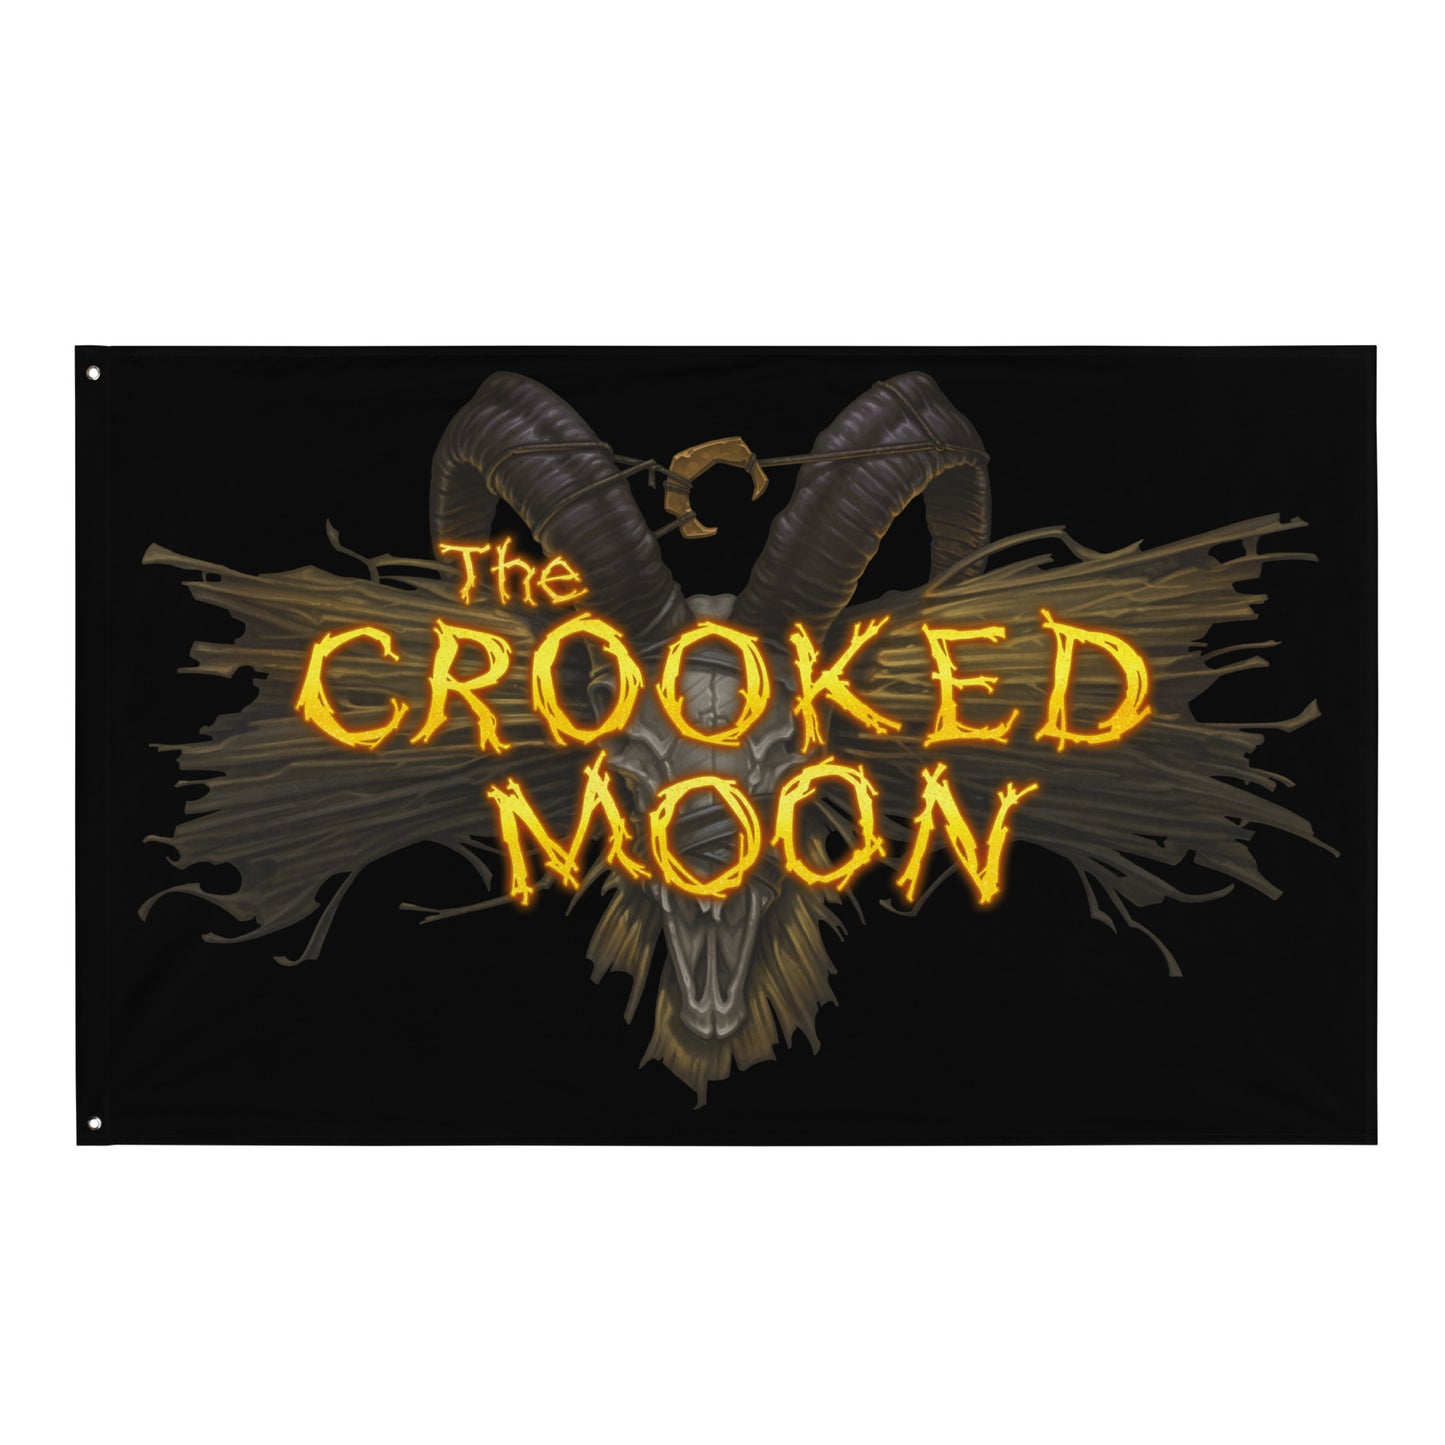 The Crooked Moon - Flag